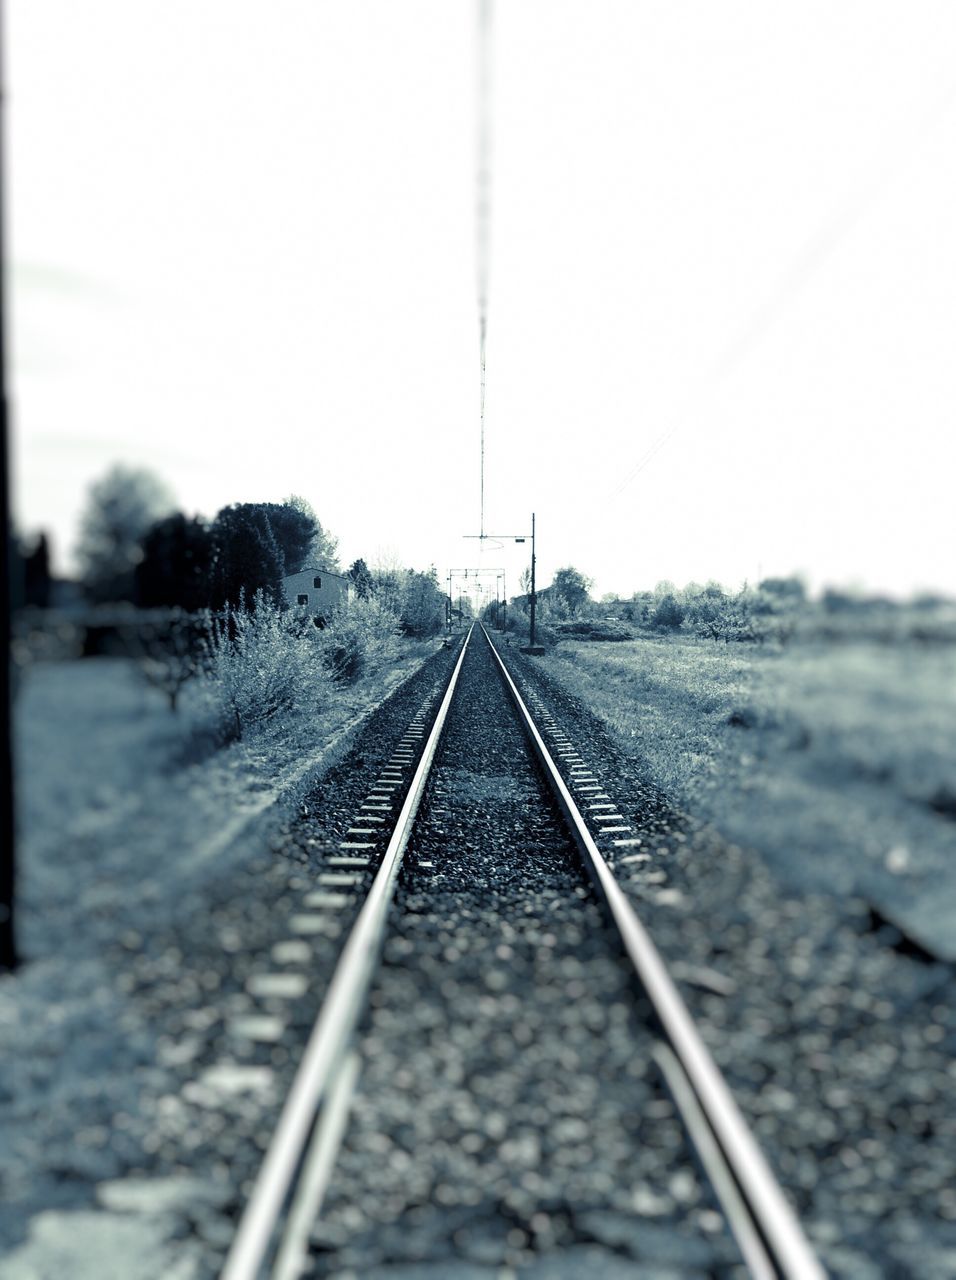 railroad track, transportation, rail transportation, metal, sky, day, the way forward, no people, outdoors, nature, parallel